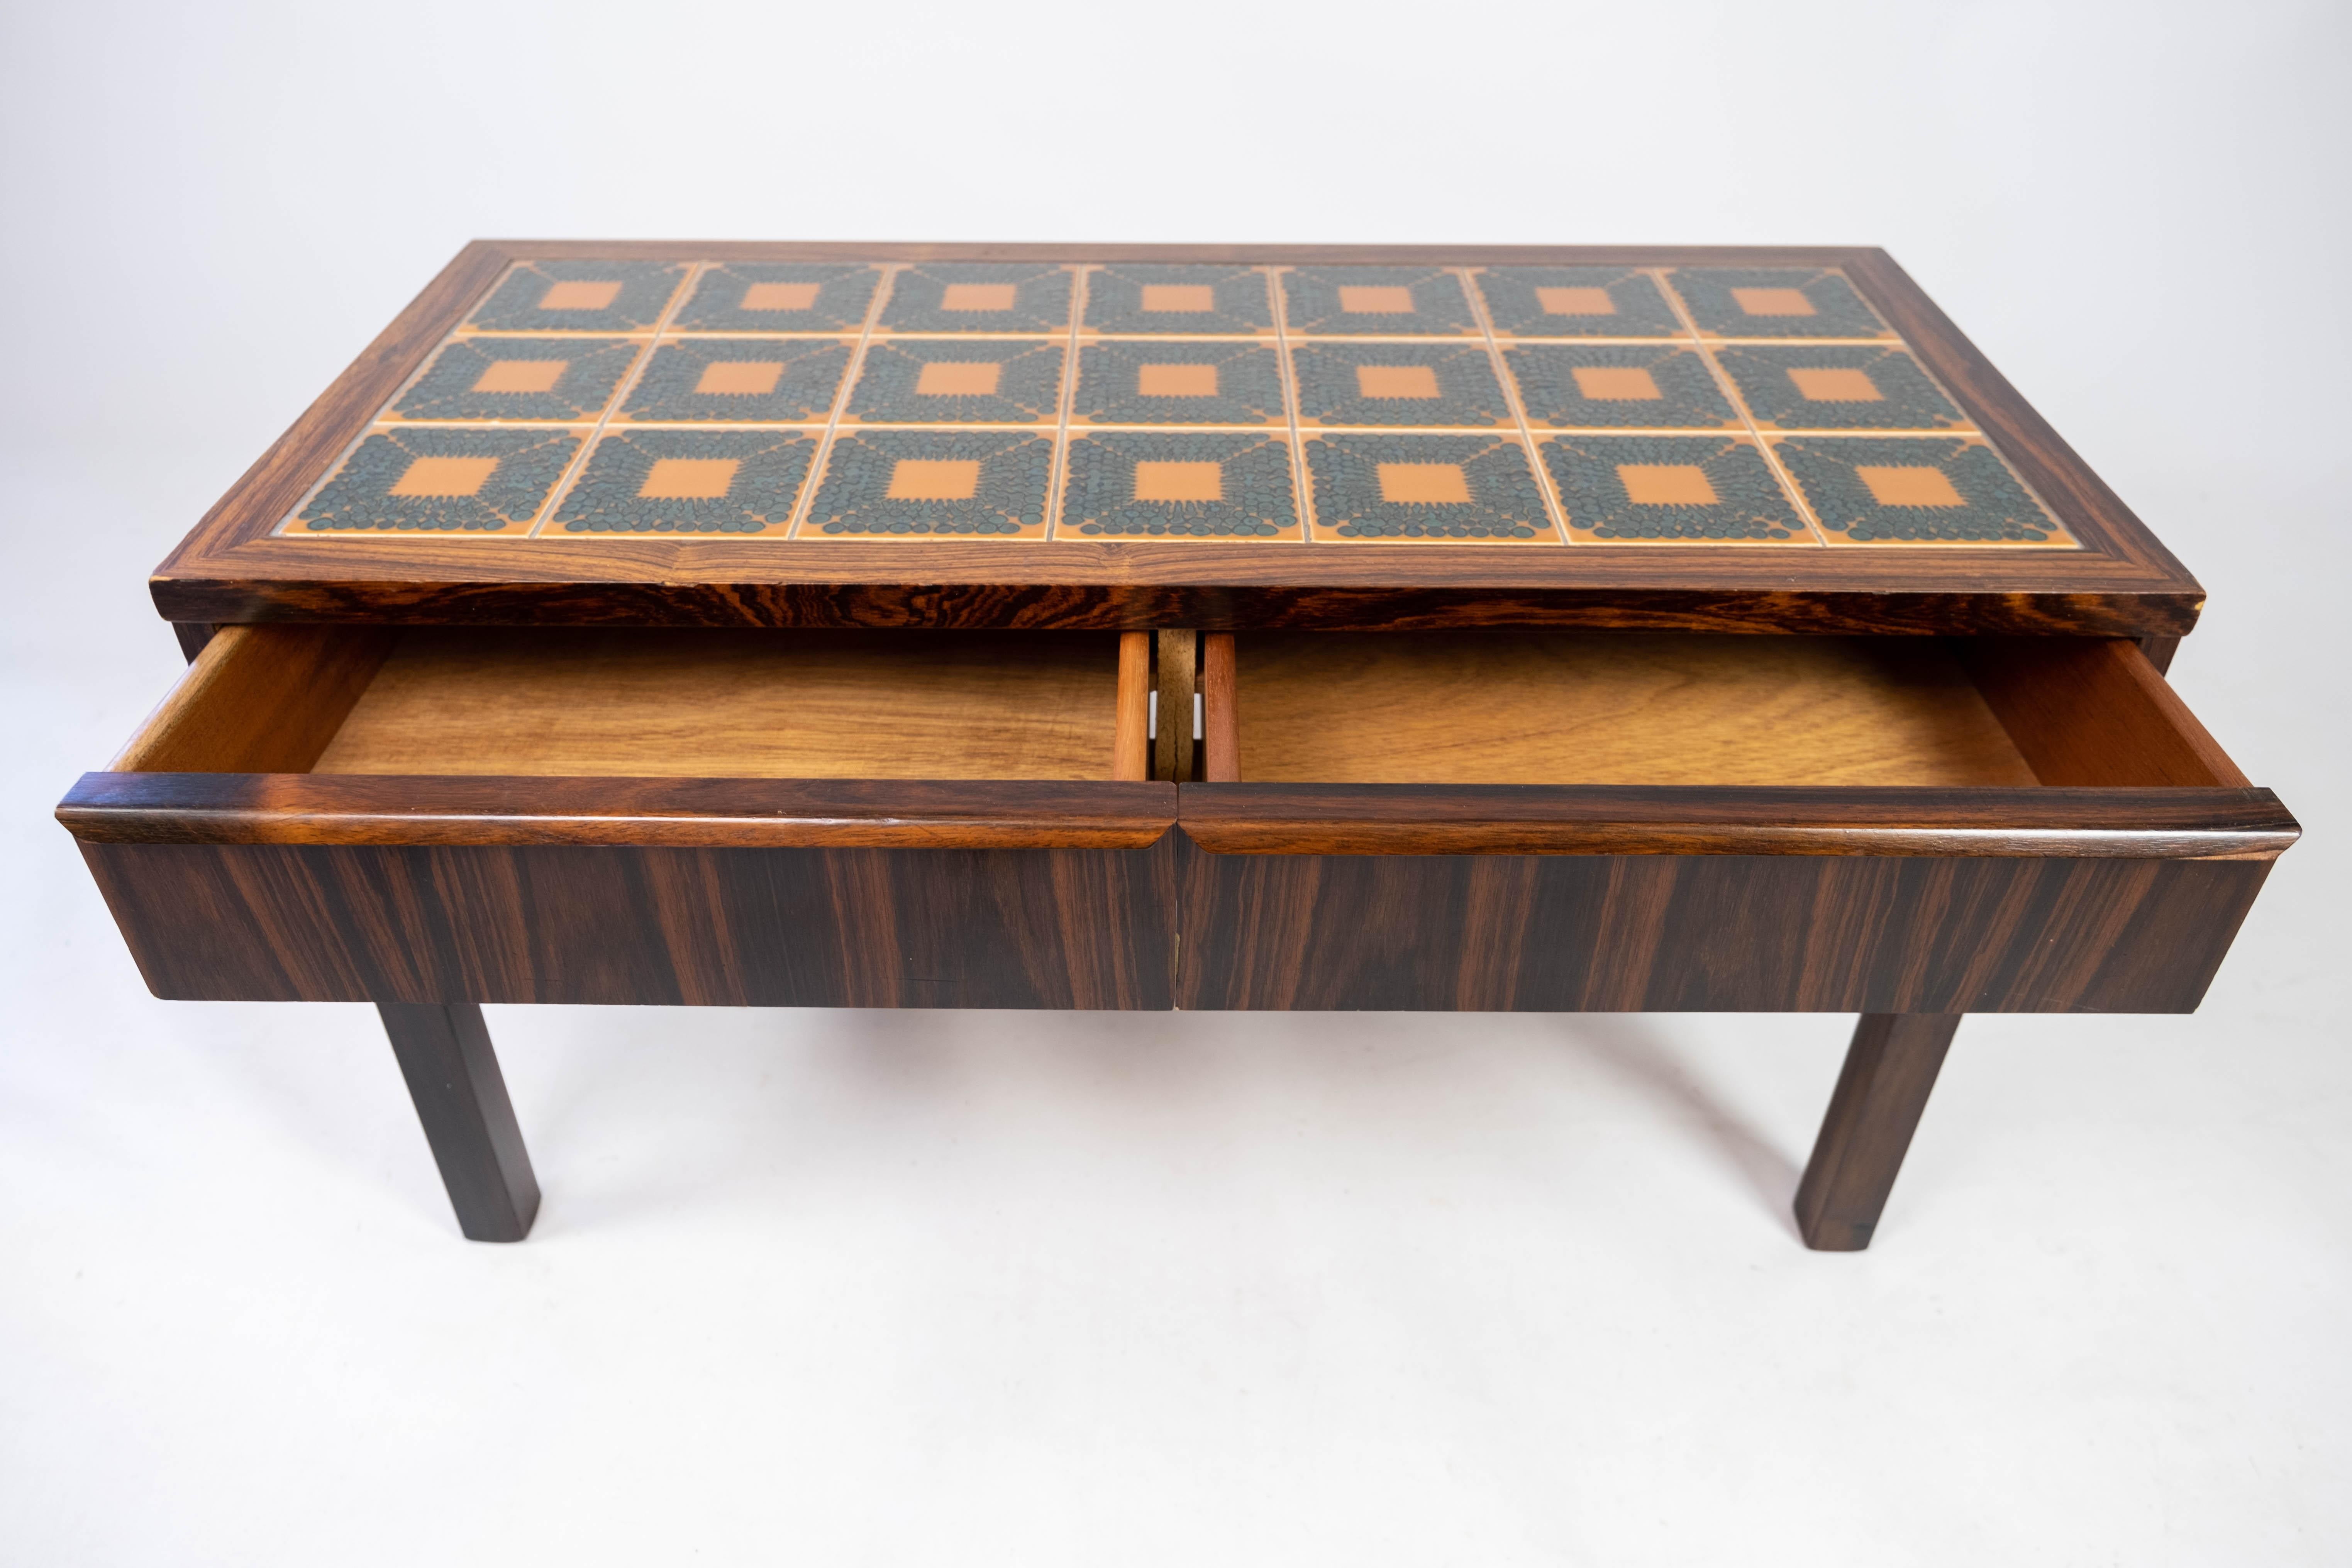 Low Chest in Rosewood and Tiles, of Danish Design from the 1960s For Sale 2